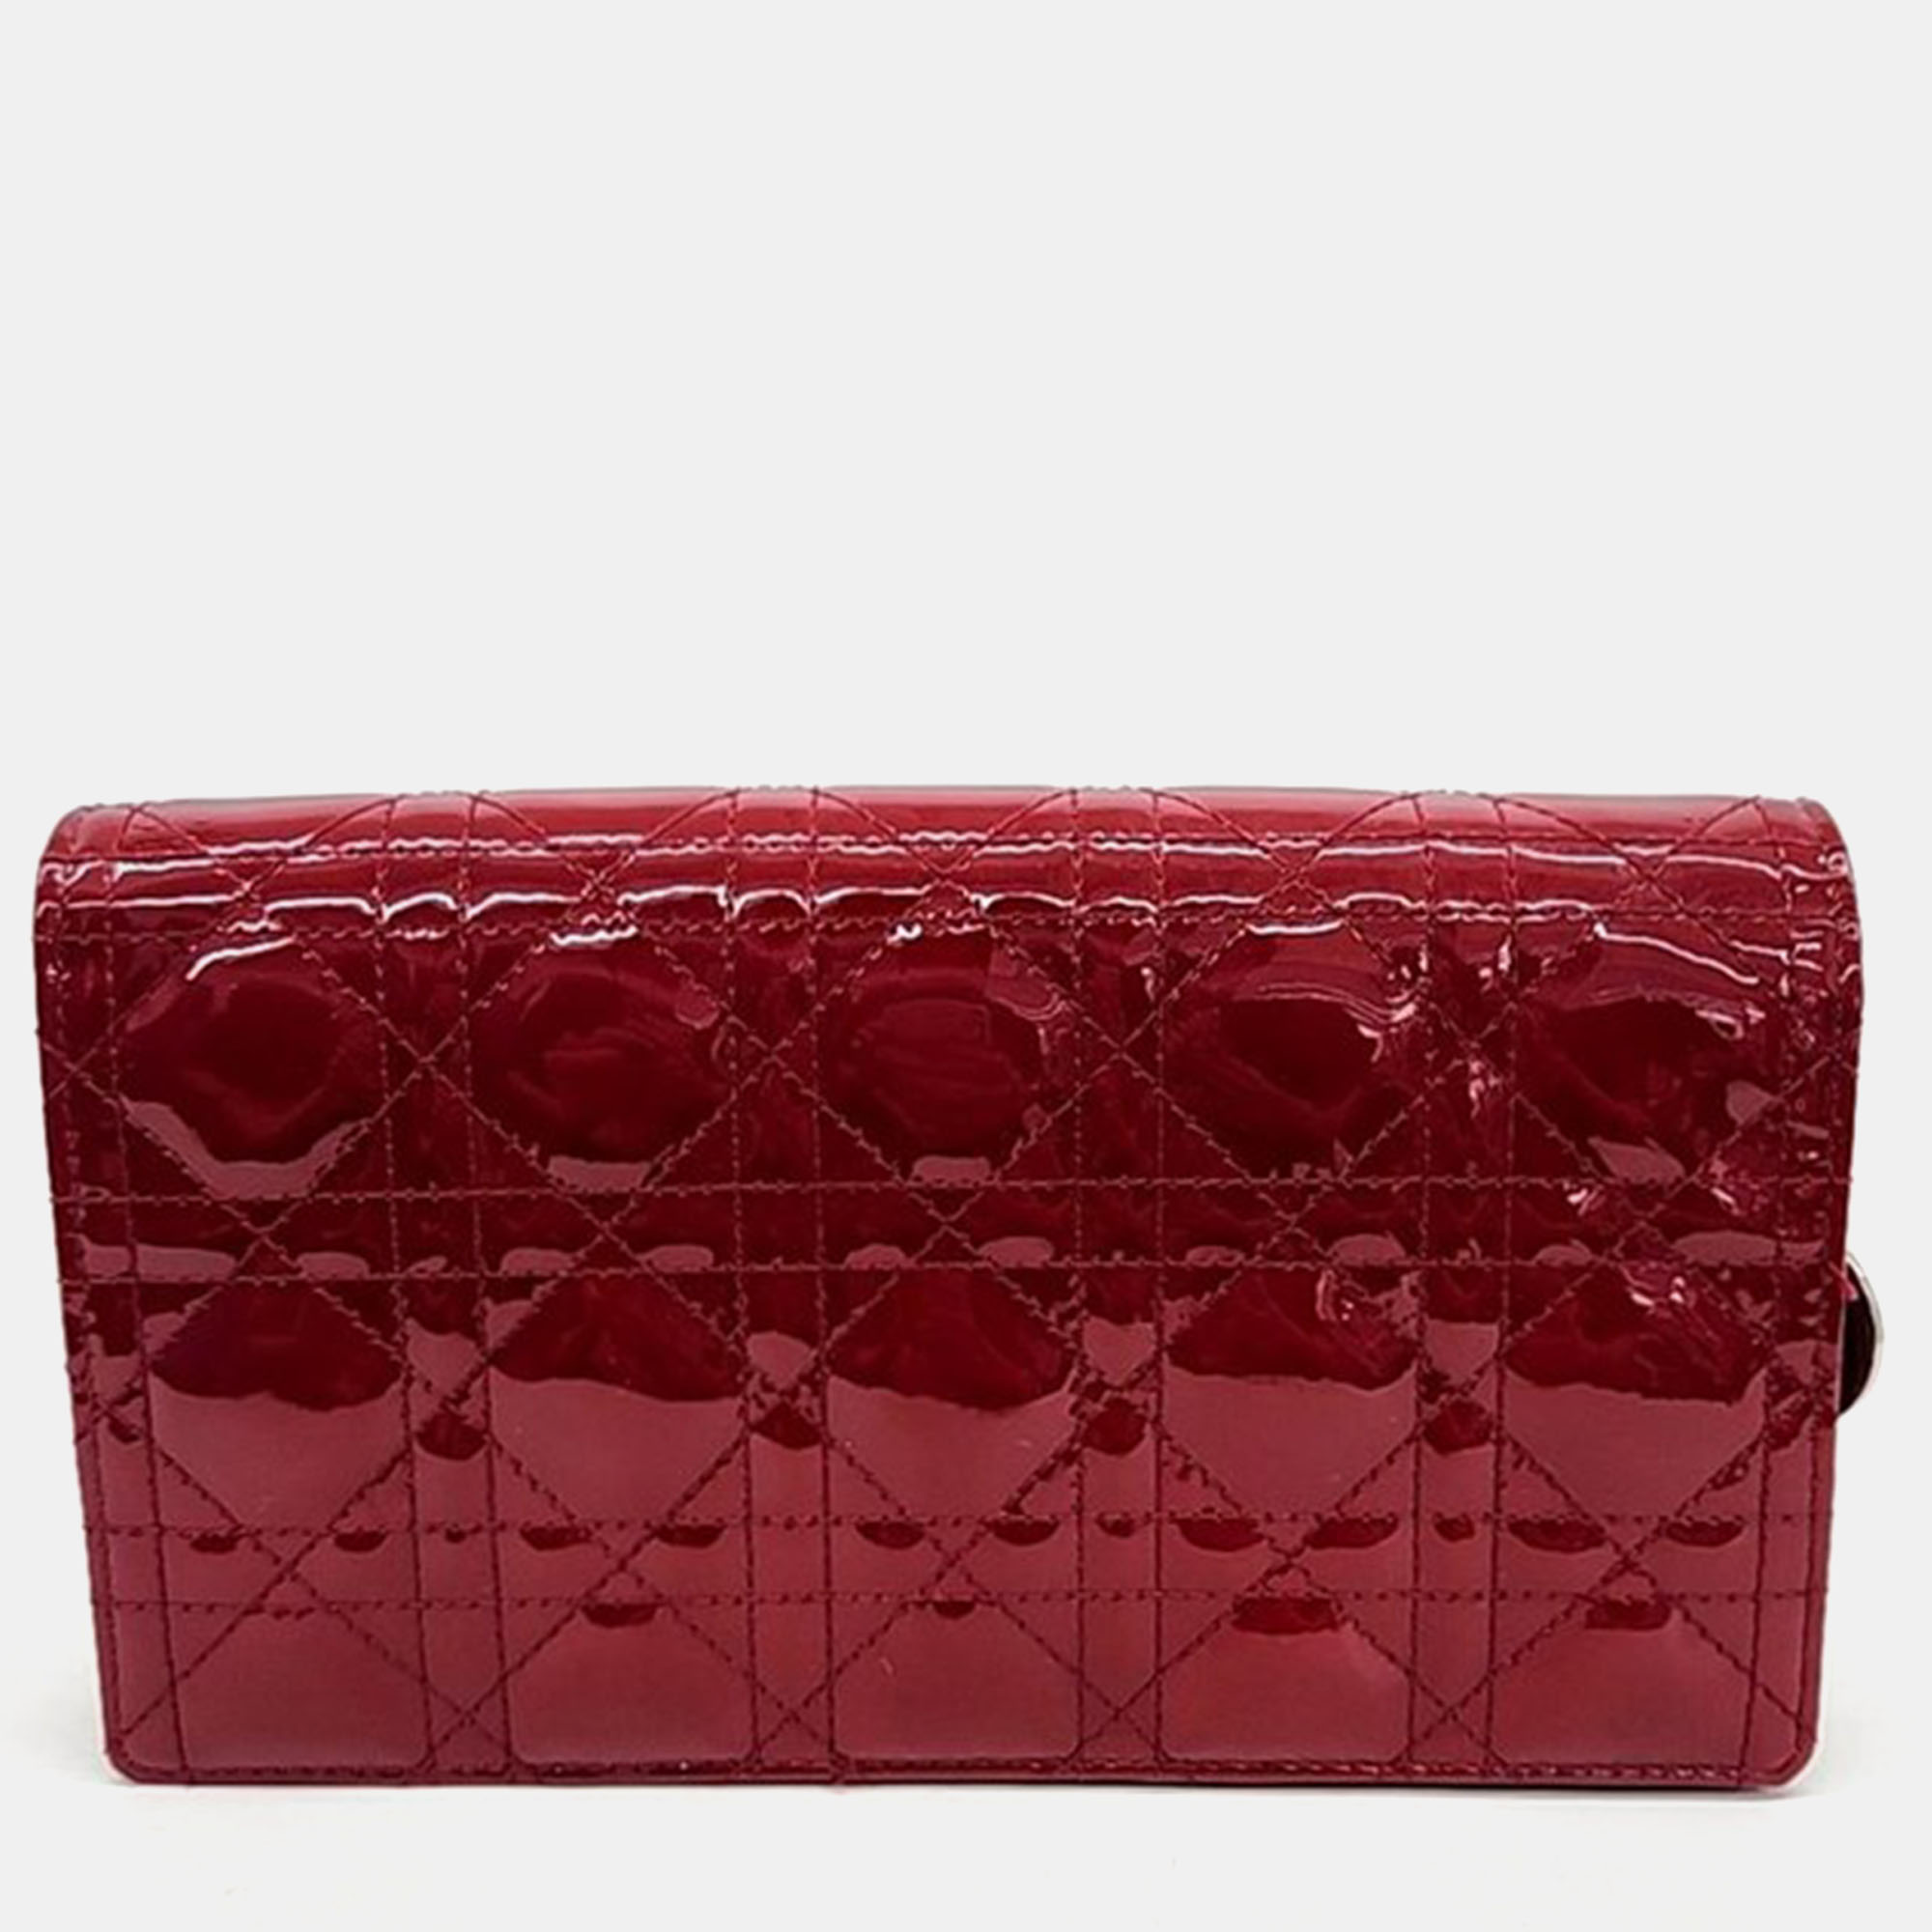 Dior chanel red patent leather cannage chain crossbody bag